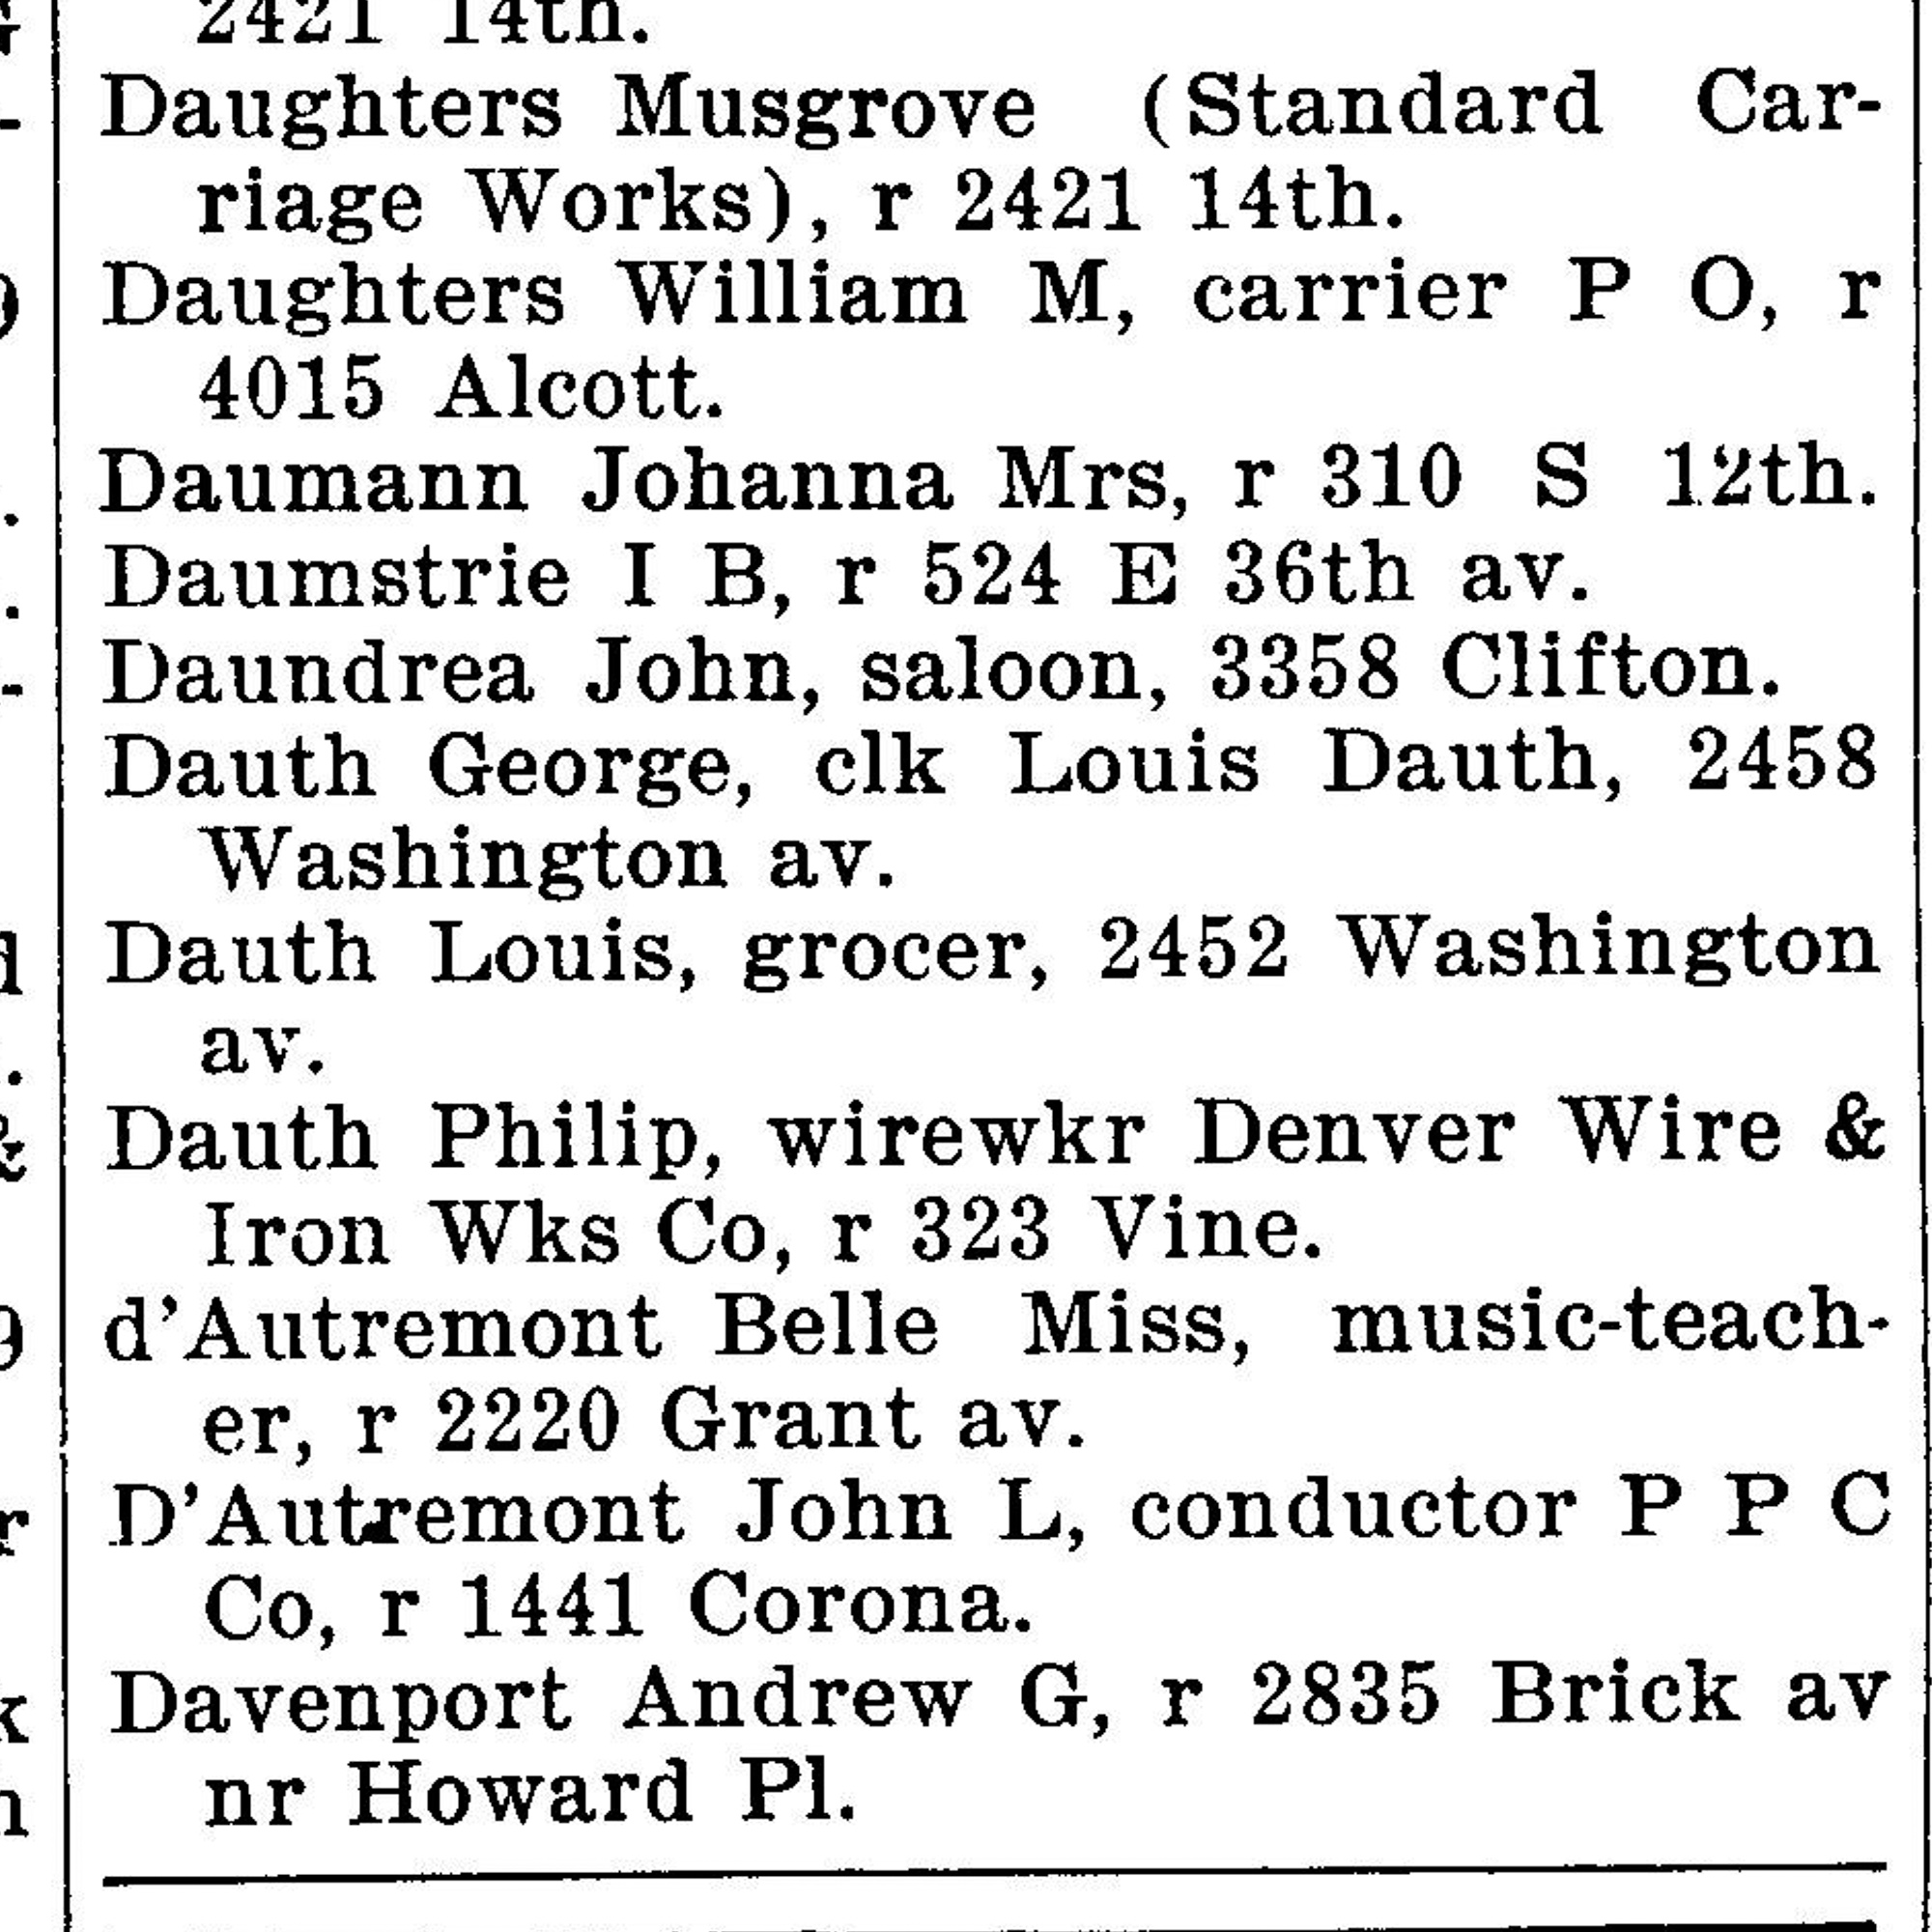 Dauth Family Archive - 1900 - Denver Directory - Entry for George, Louis, and Philip Dauth